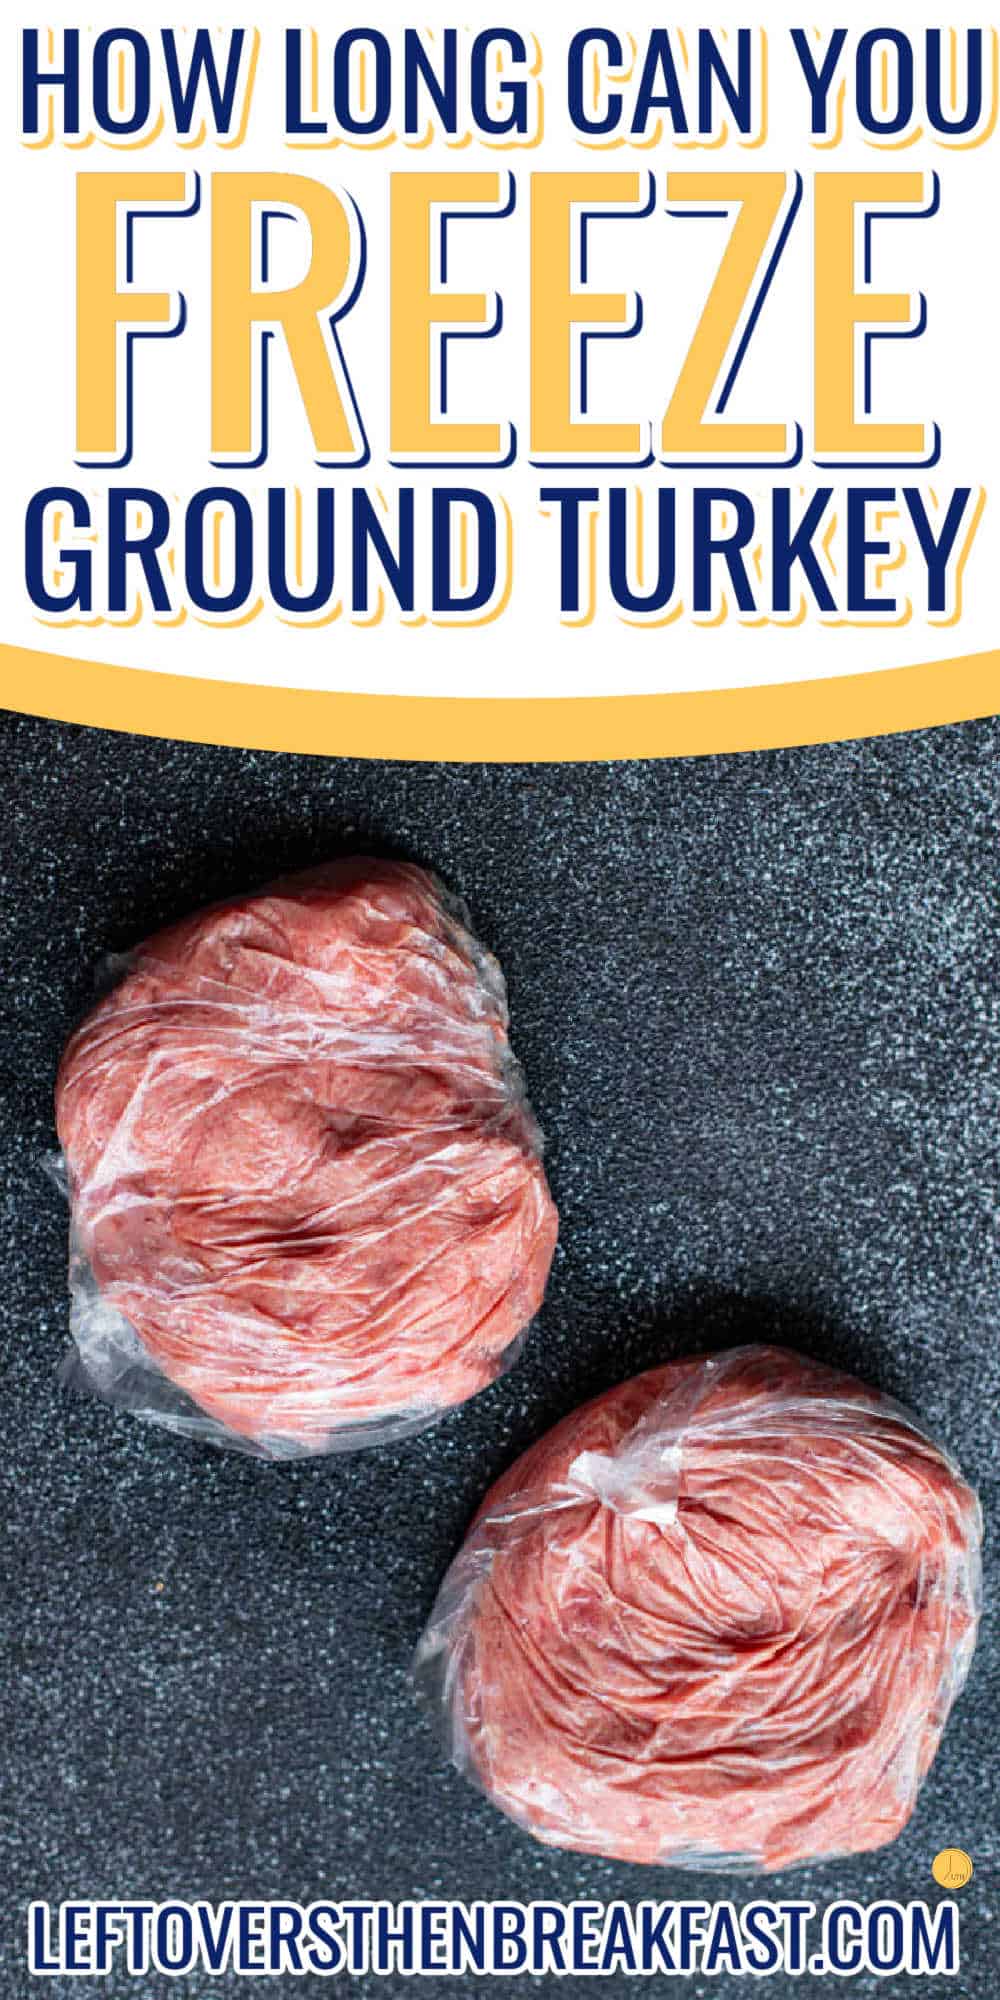 two packages of frozen turkey on a a black marble surface with text "how long can you freeze ground turkey?"